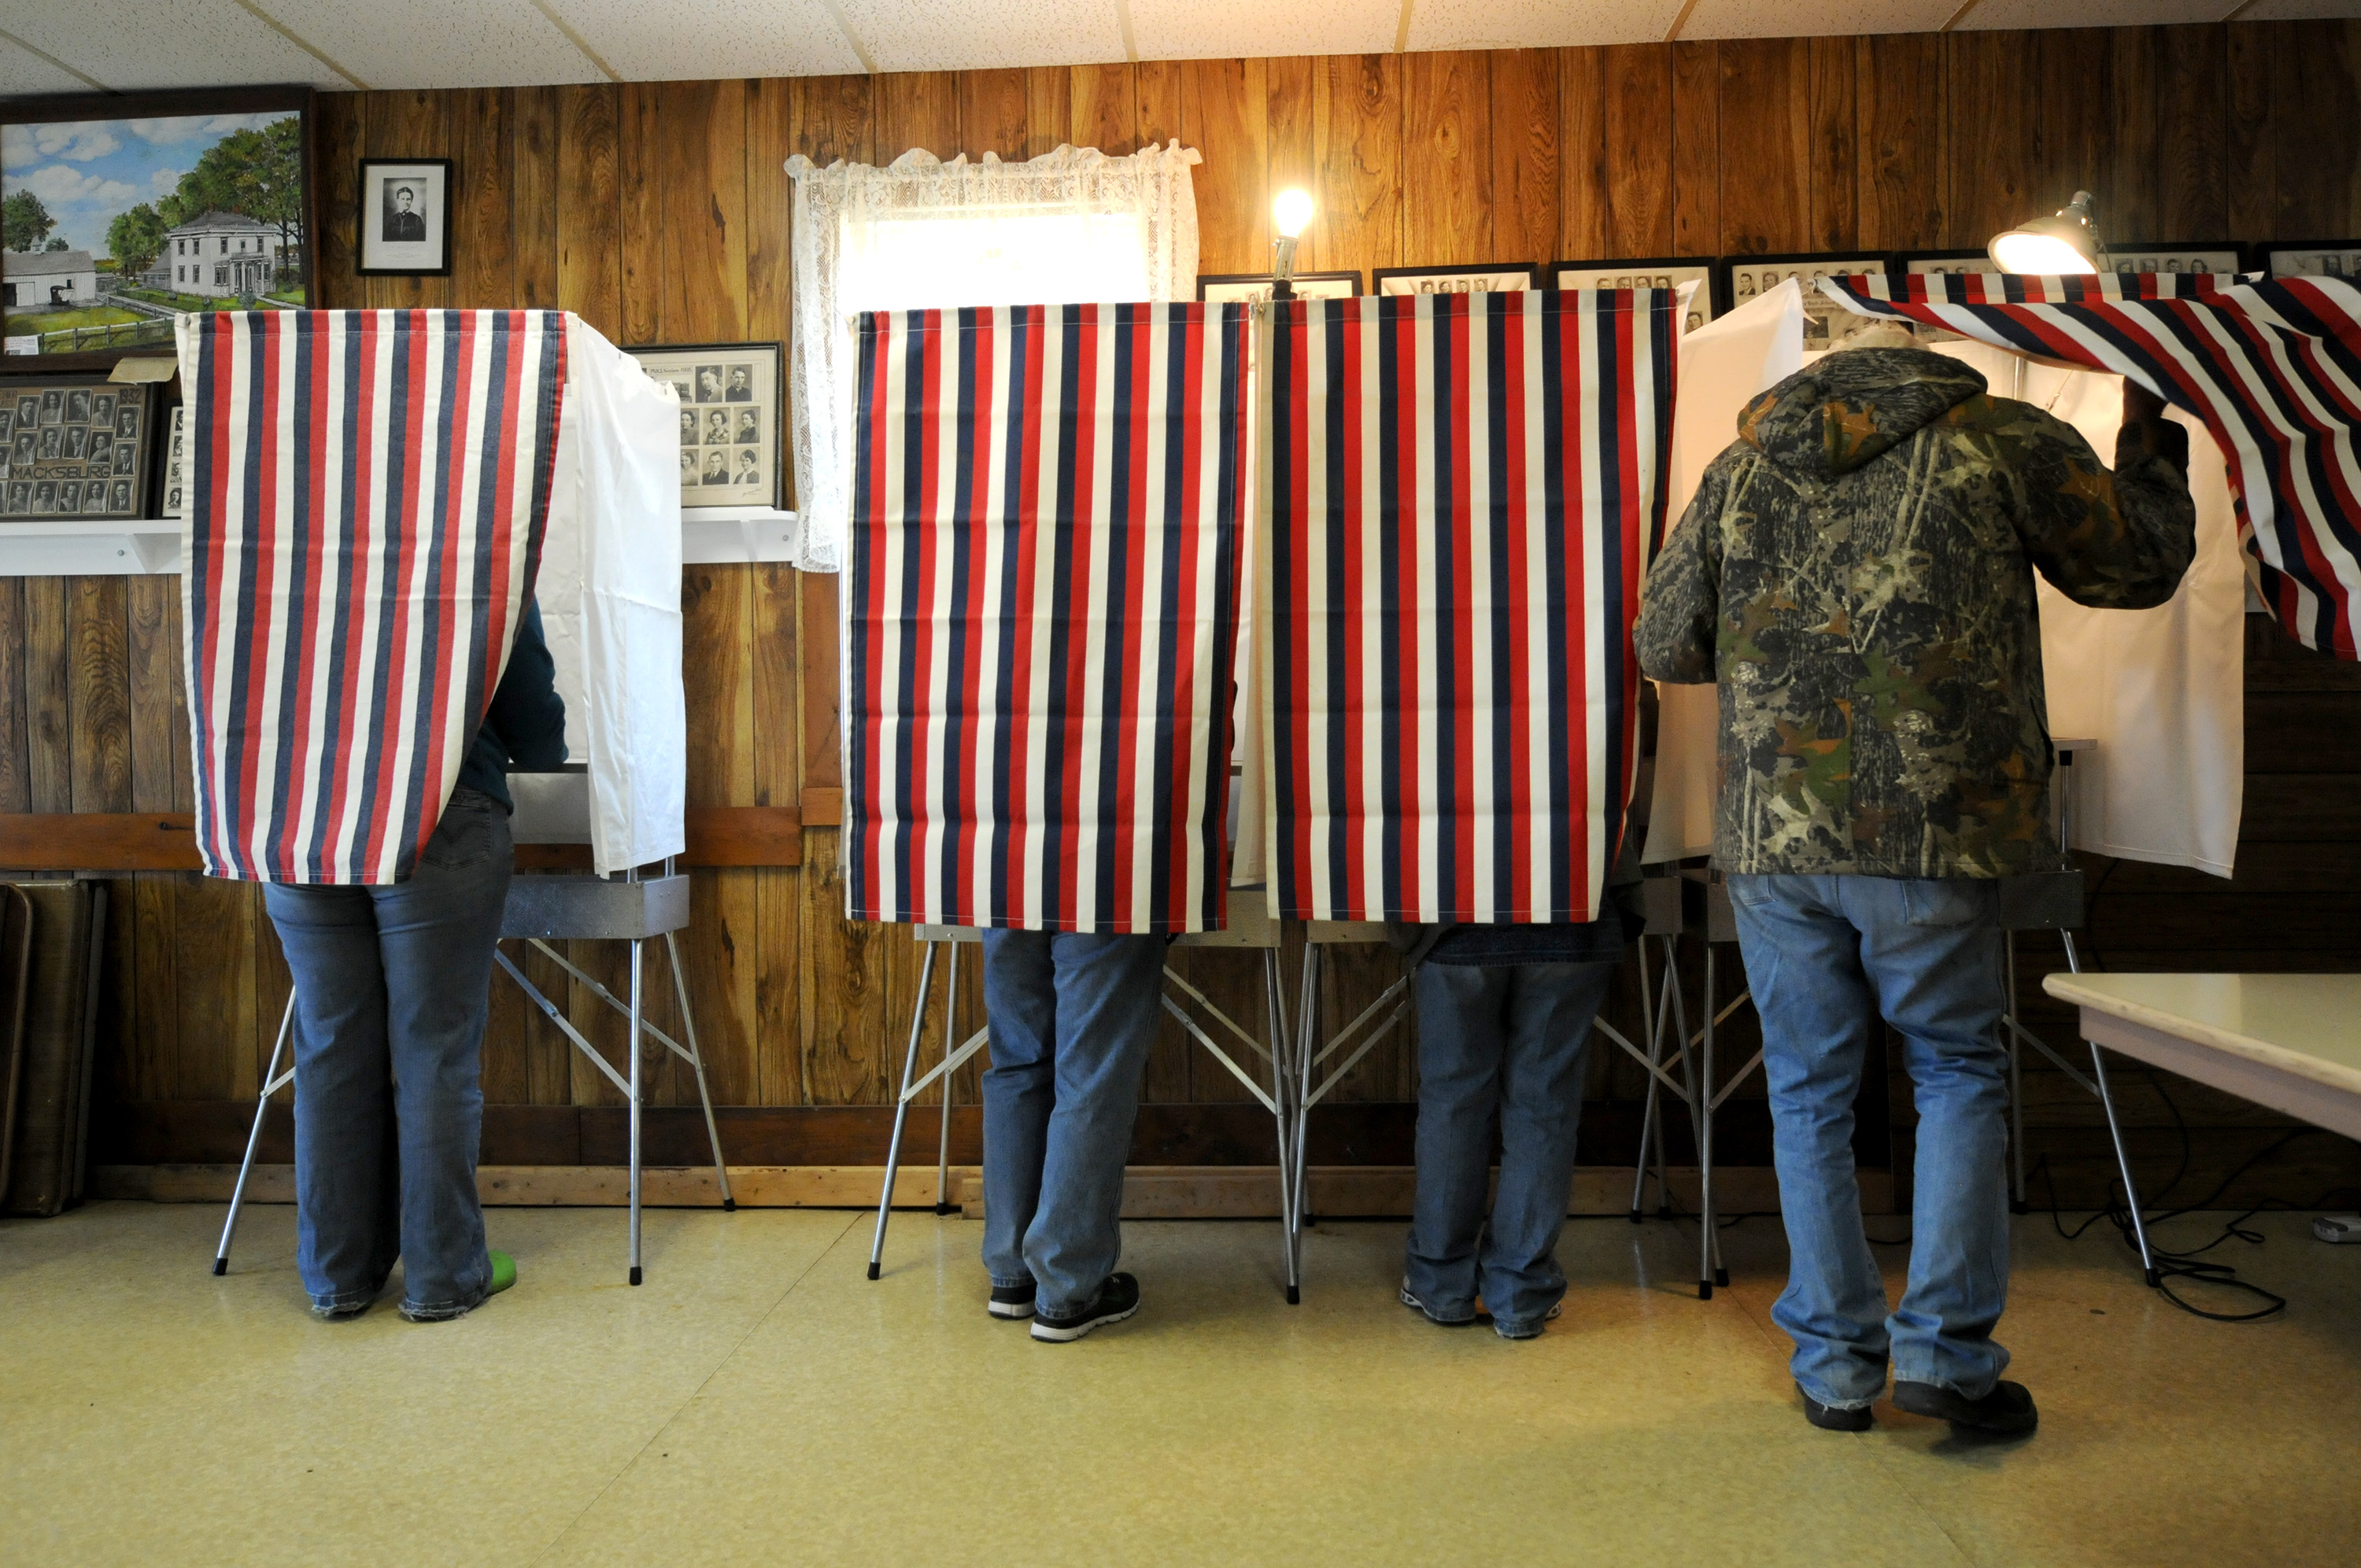 Voters cast their ballots at the WCR Hall November 6, 2012 in Macksburg, Iowa.
